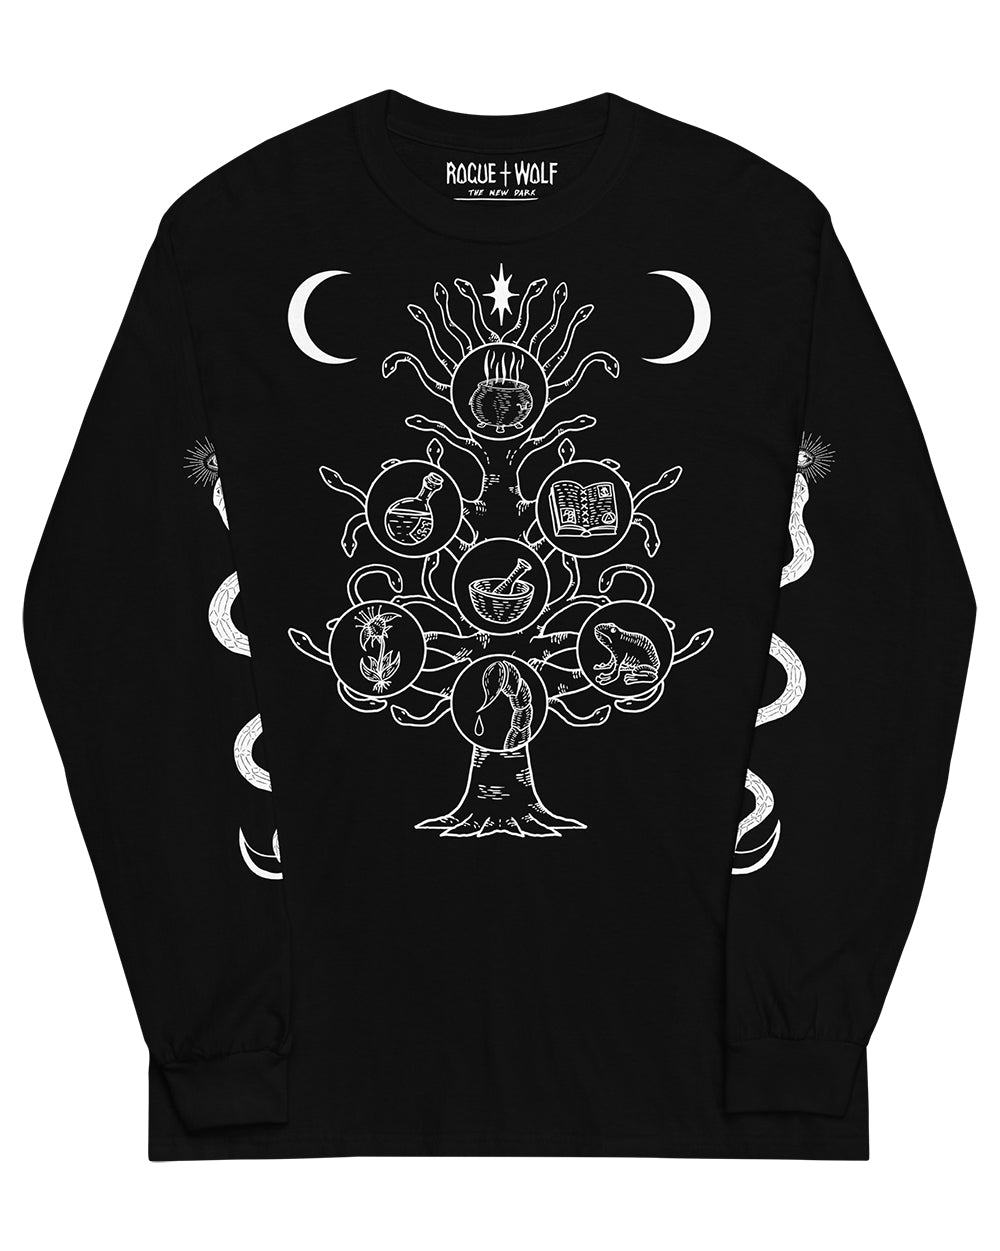 Tree of Life Long Sleeve Unisex Tee: Witchy Pagan Gothic Clothing - Alternative Occult Vegan - On Demand Eco-friendly Sustainable Fashion